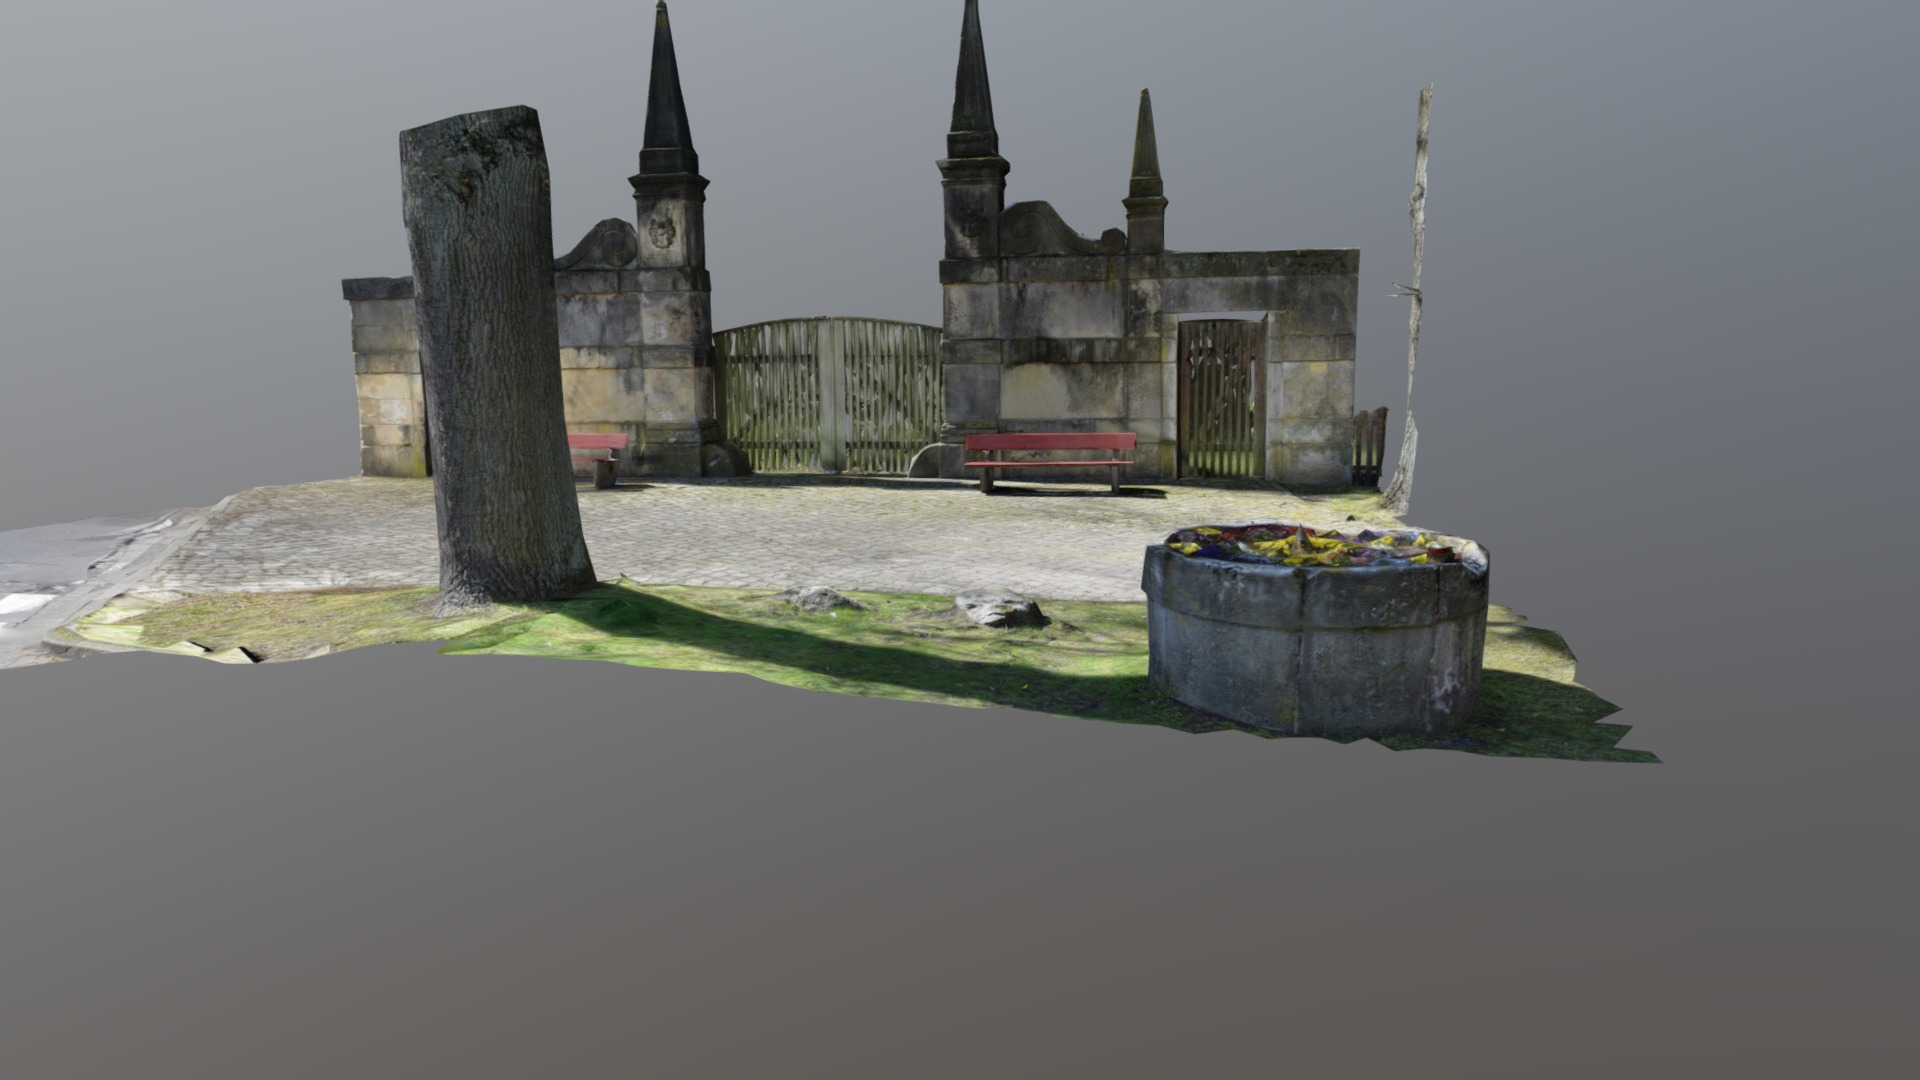 3D model Stechinellitor final - This is a 3D model of the Stechinellitor final. The 3D model is about a castle with a large stone castle.